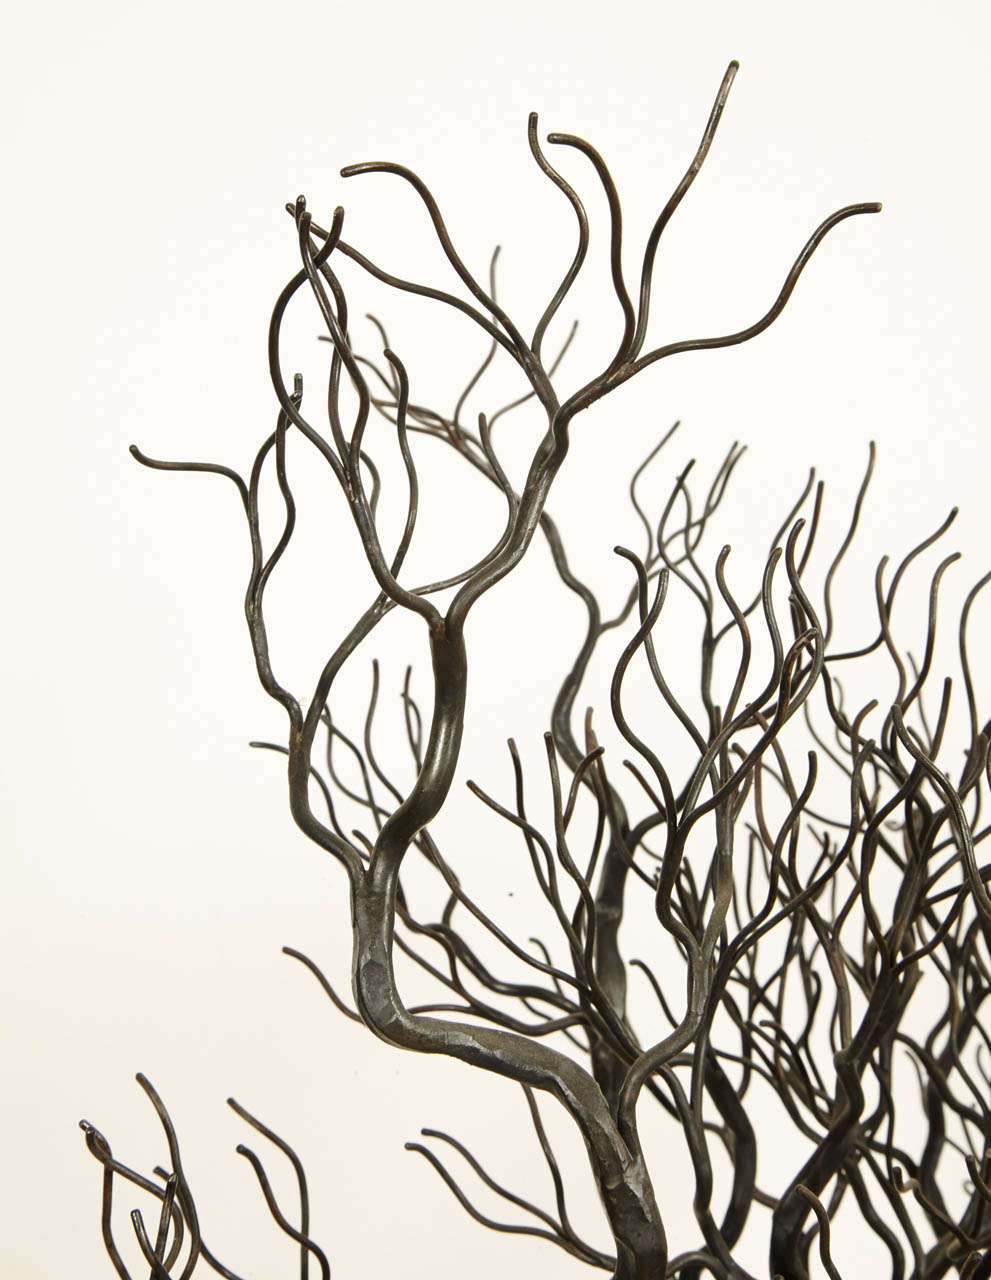 Forged Iron Olive Tree, 2012, by Manuel Simon 2